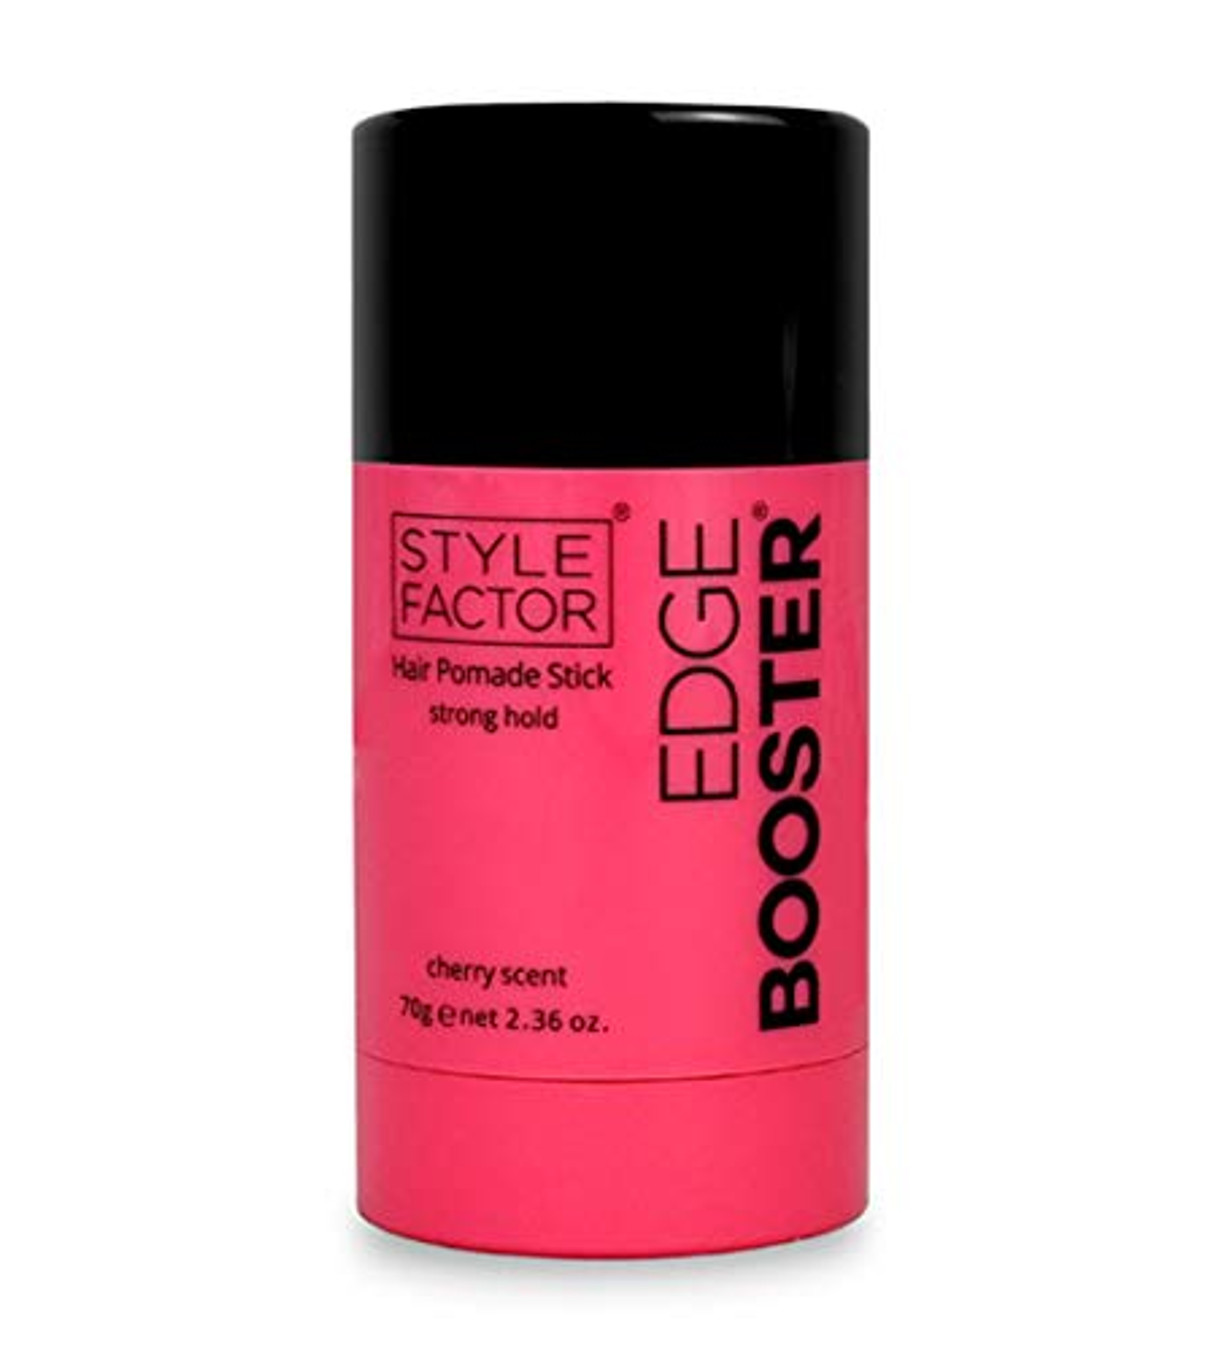 Style Factor EDGE BOOSTER Stick (2.36 oz)